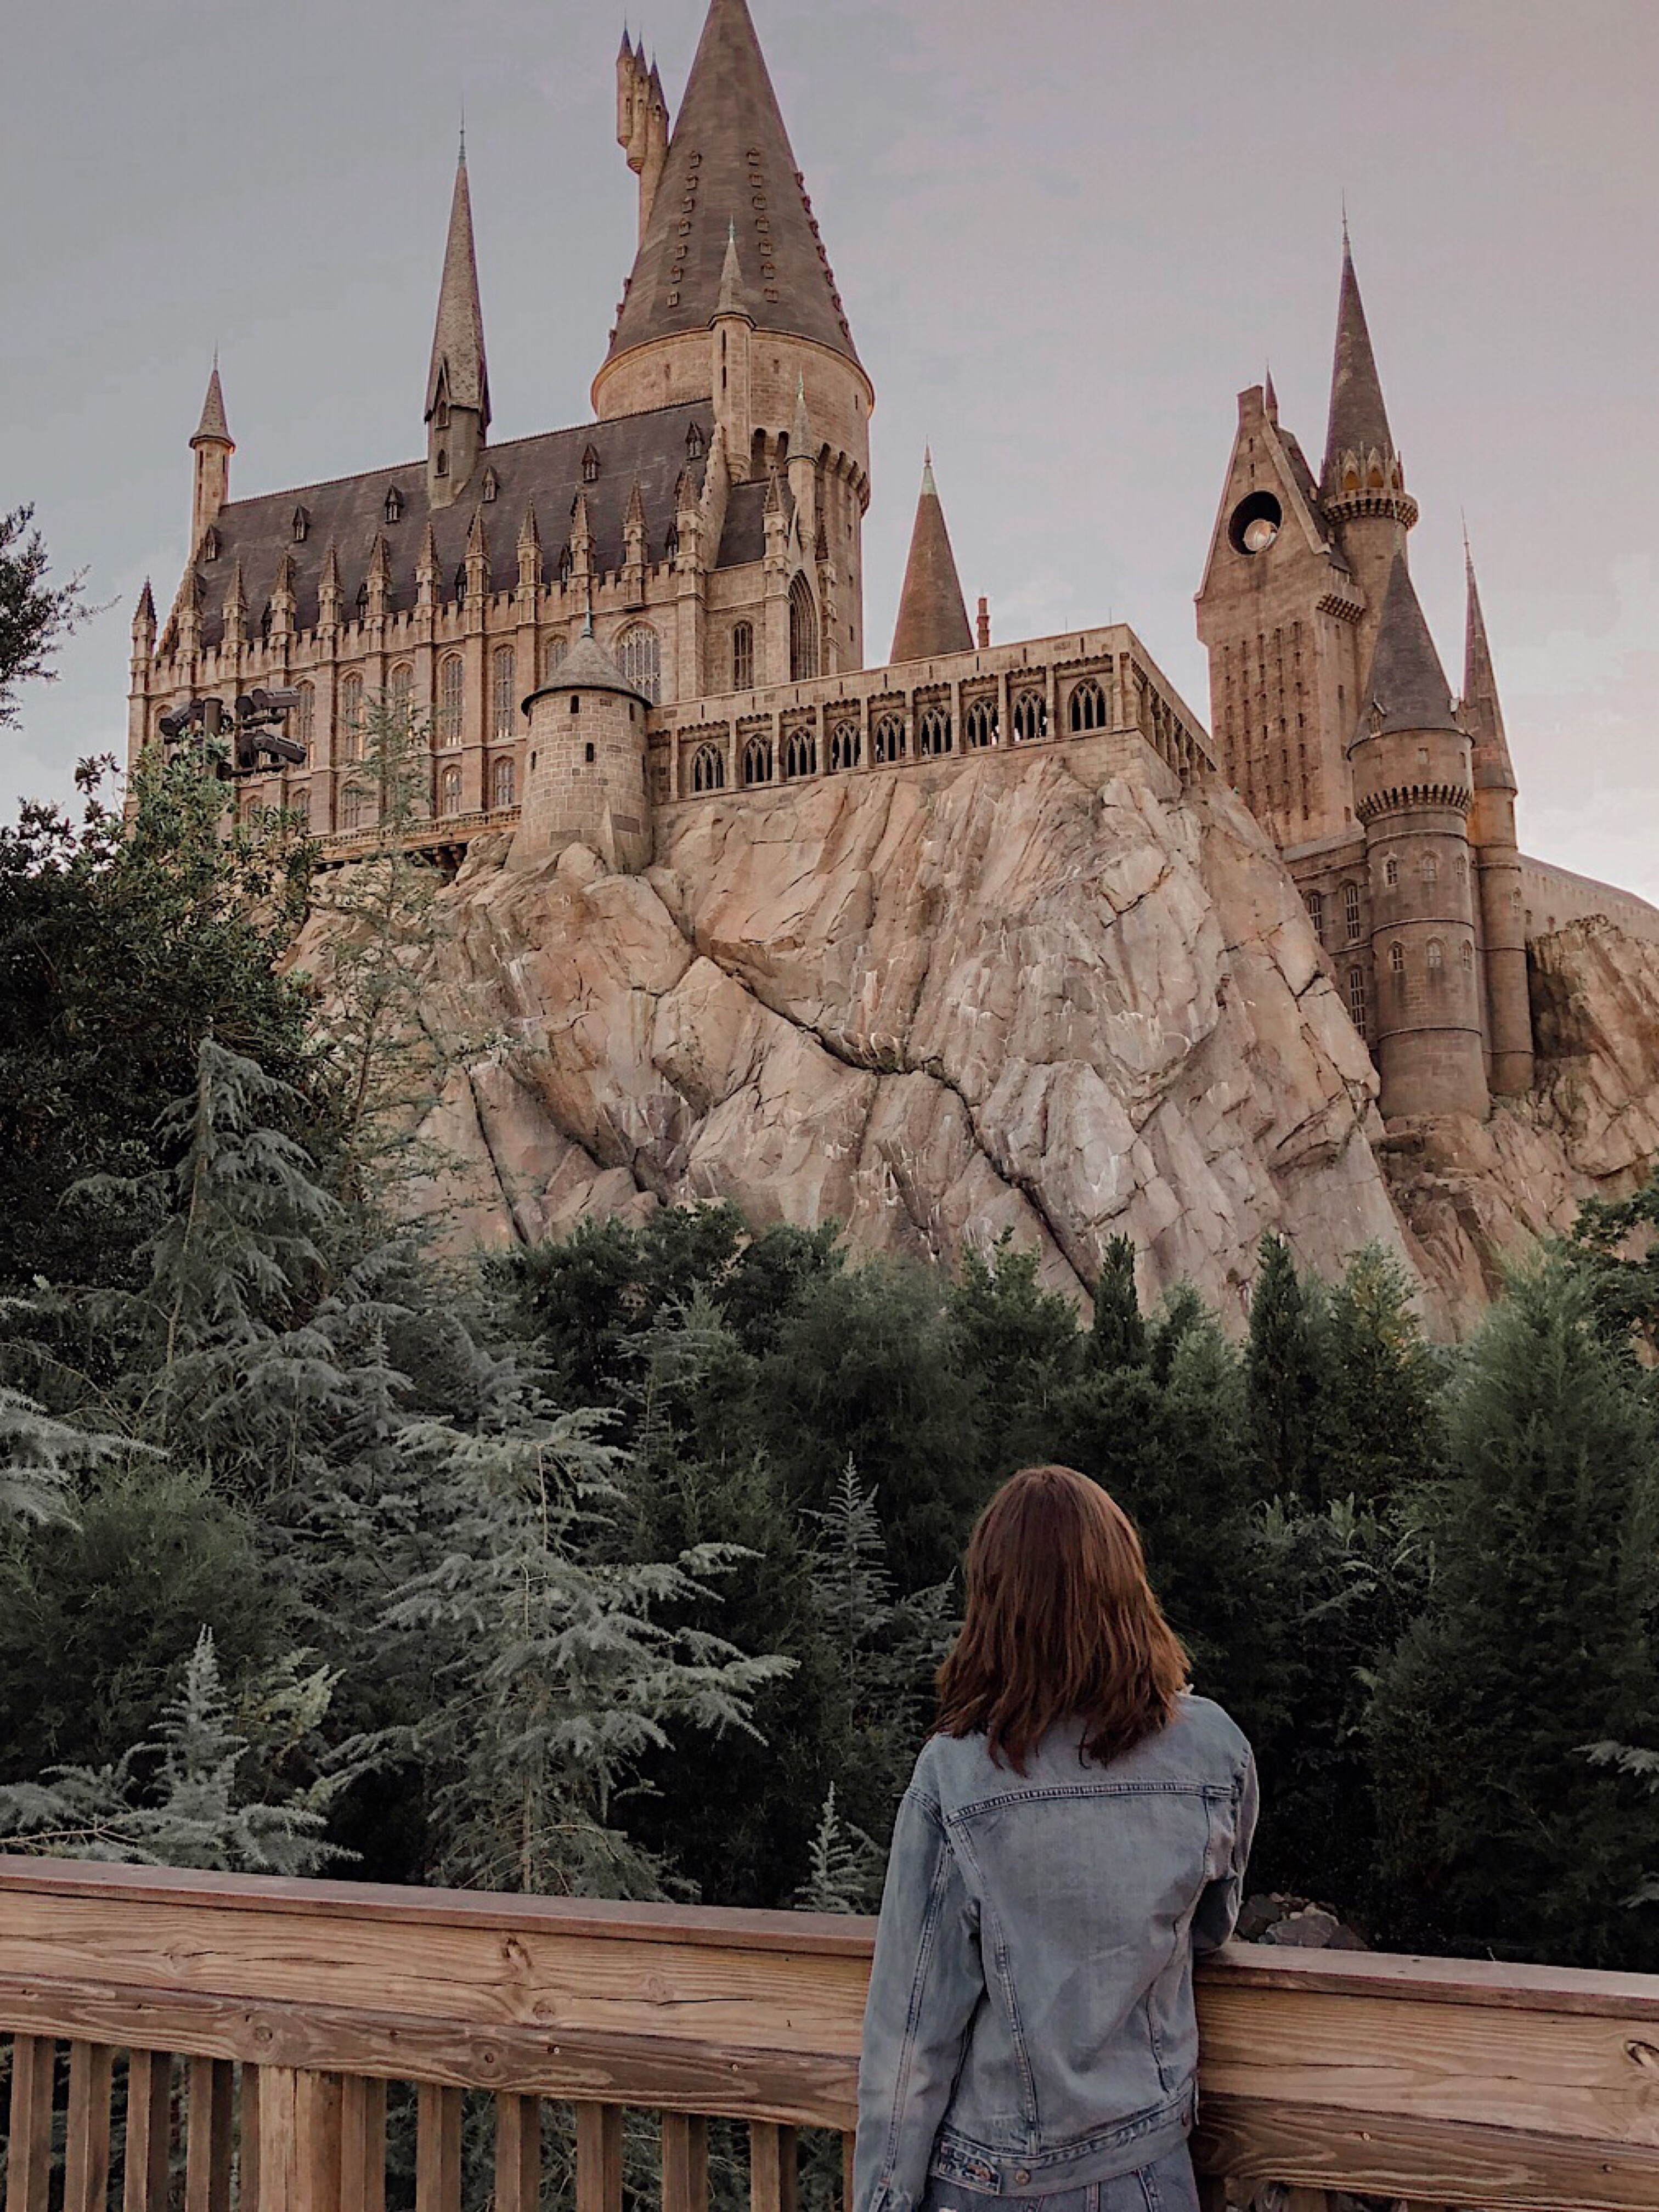 A Muggle’s Ultimate Guide to Hogsmeade Village